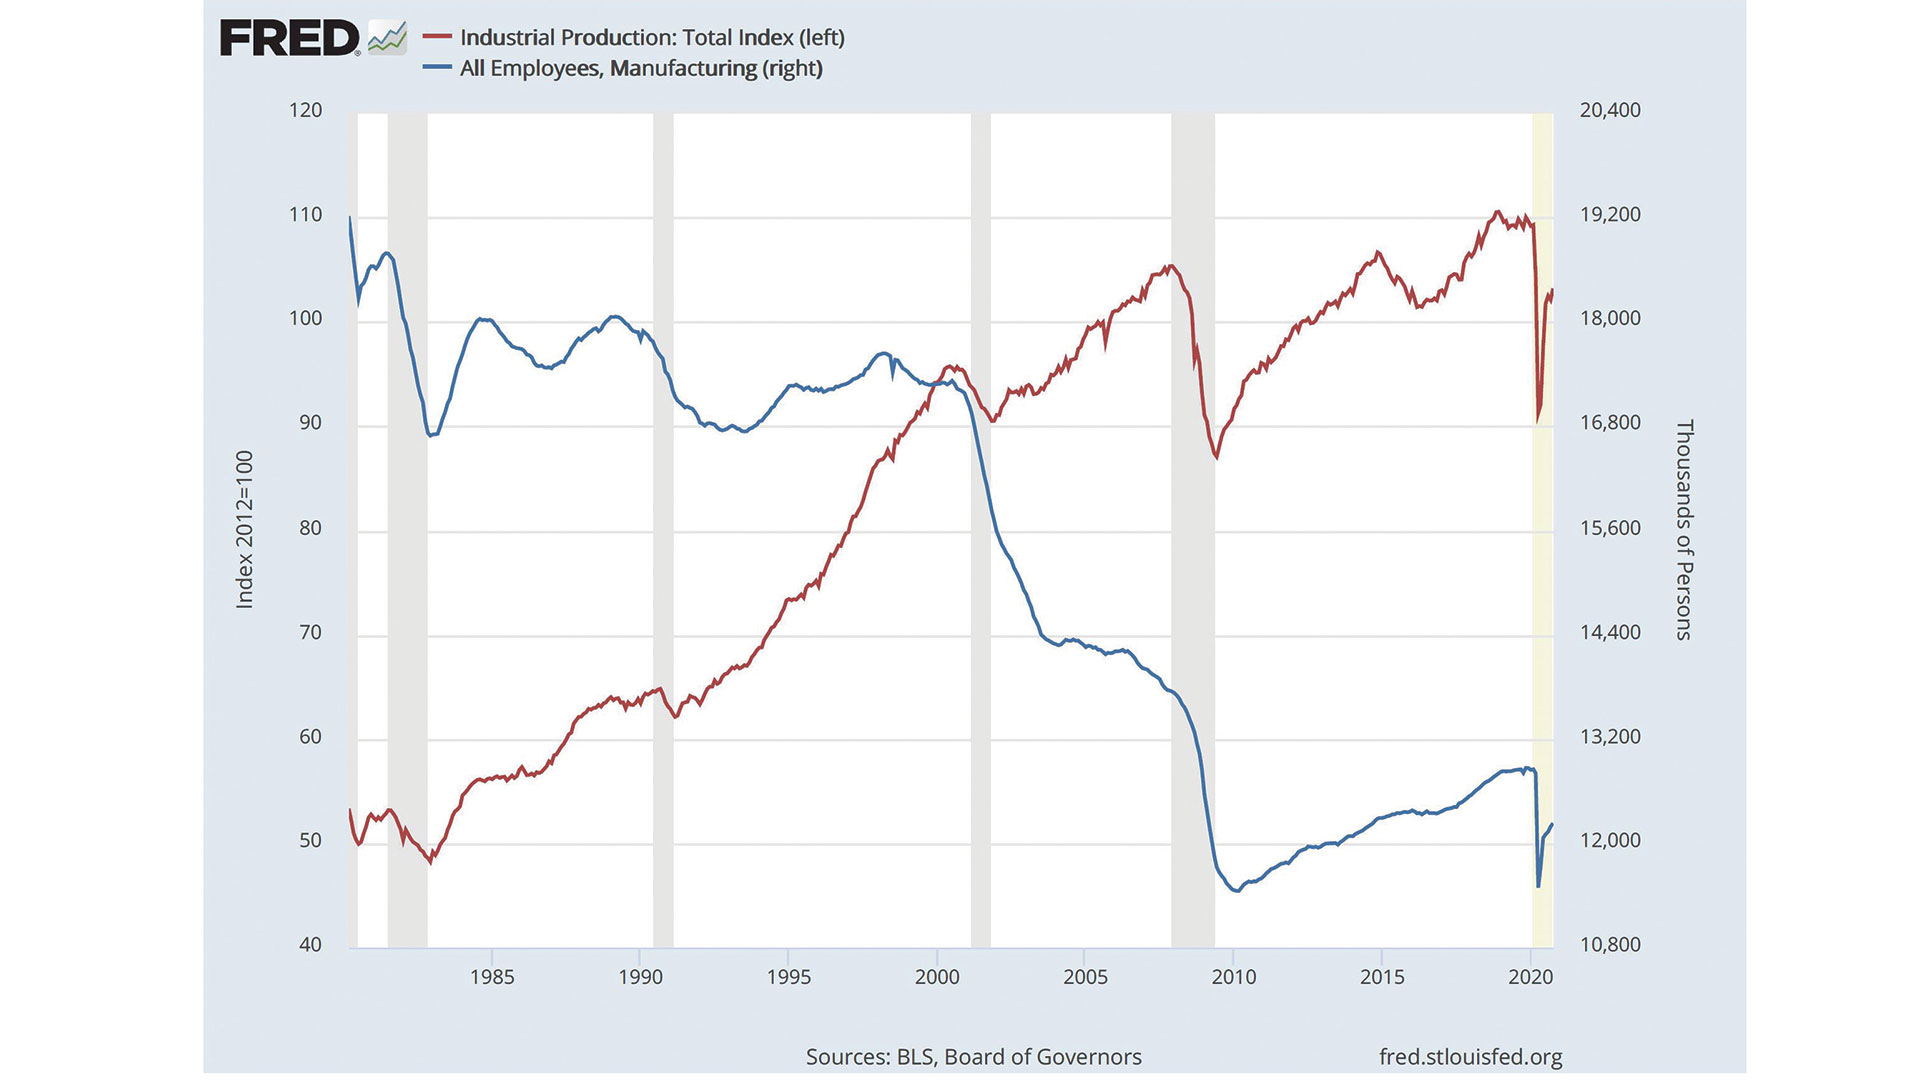 Index of Industrial Production (red) plotted on same graph as Manufacturing Employment (blue). Gray shaded bars are years when the economy was in recession, with the yellow shaded area caused by COVID-19.